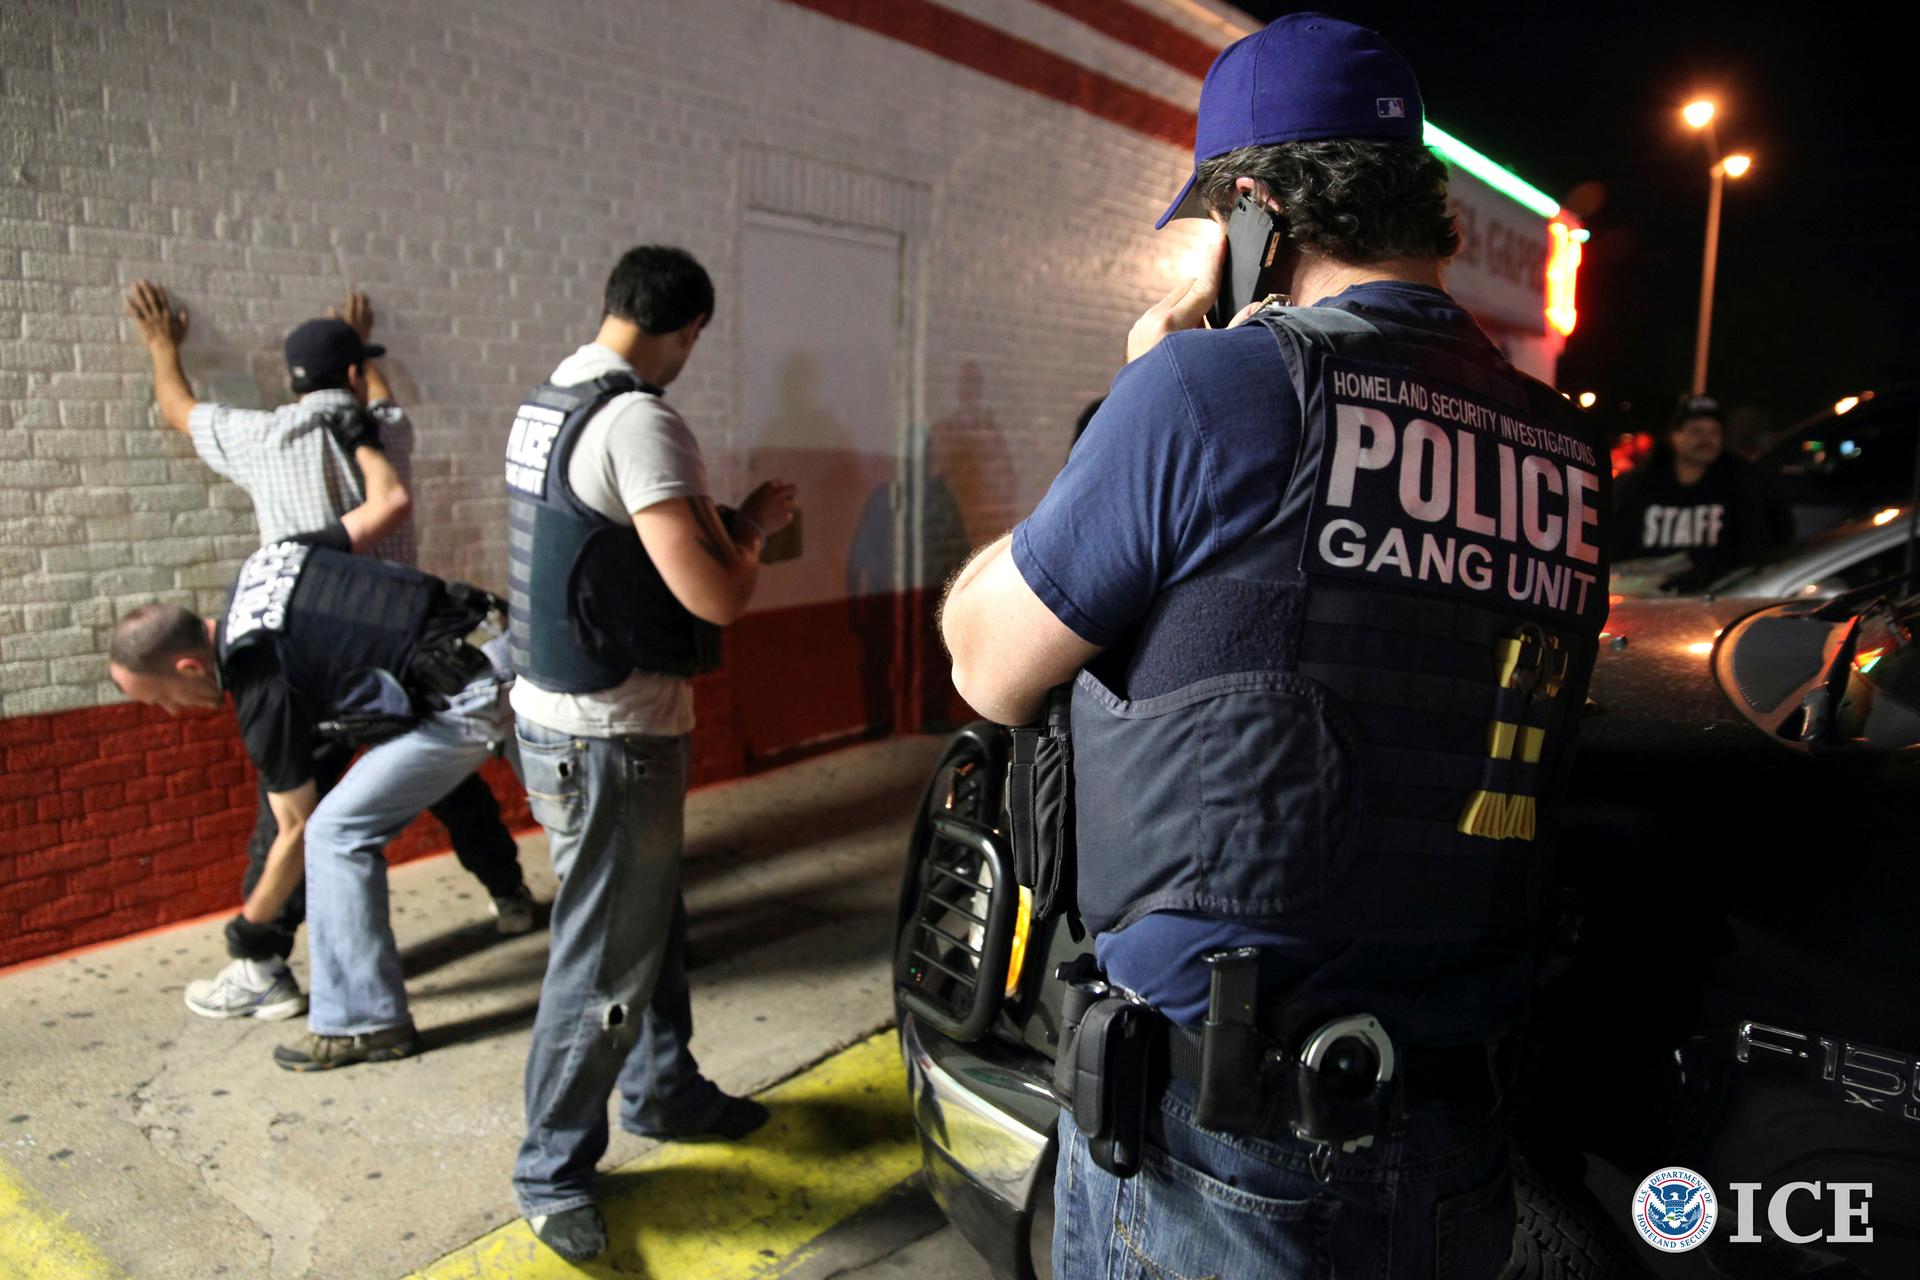 Agents surround man up against a wall, on has "Homeland Security Investigations POLICE Gang Unit" on his vest